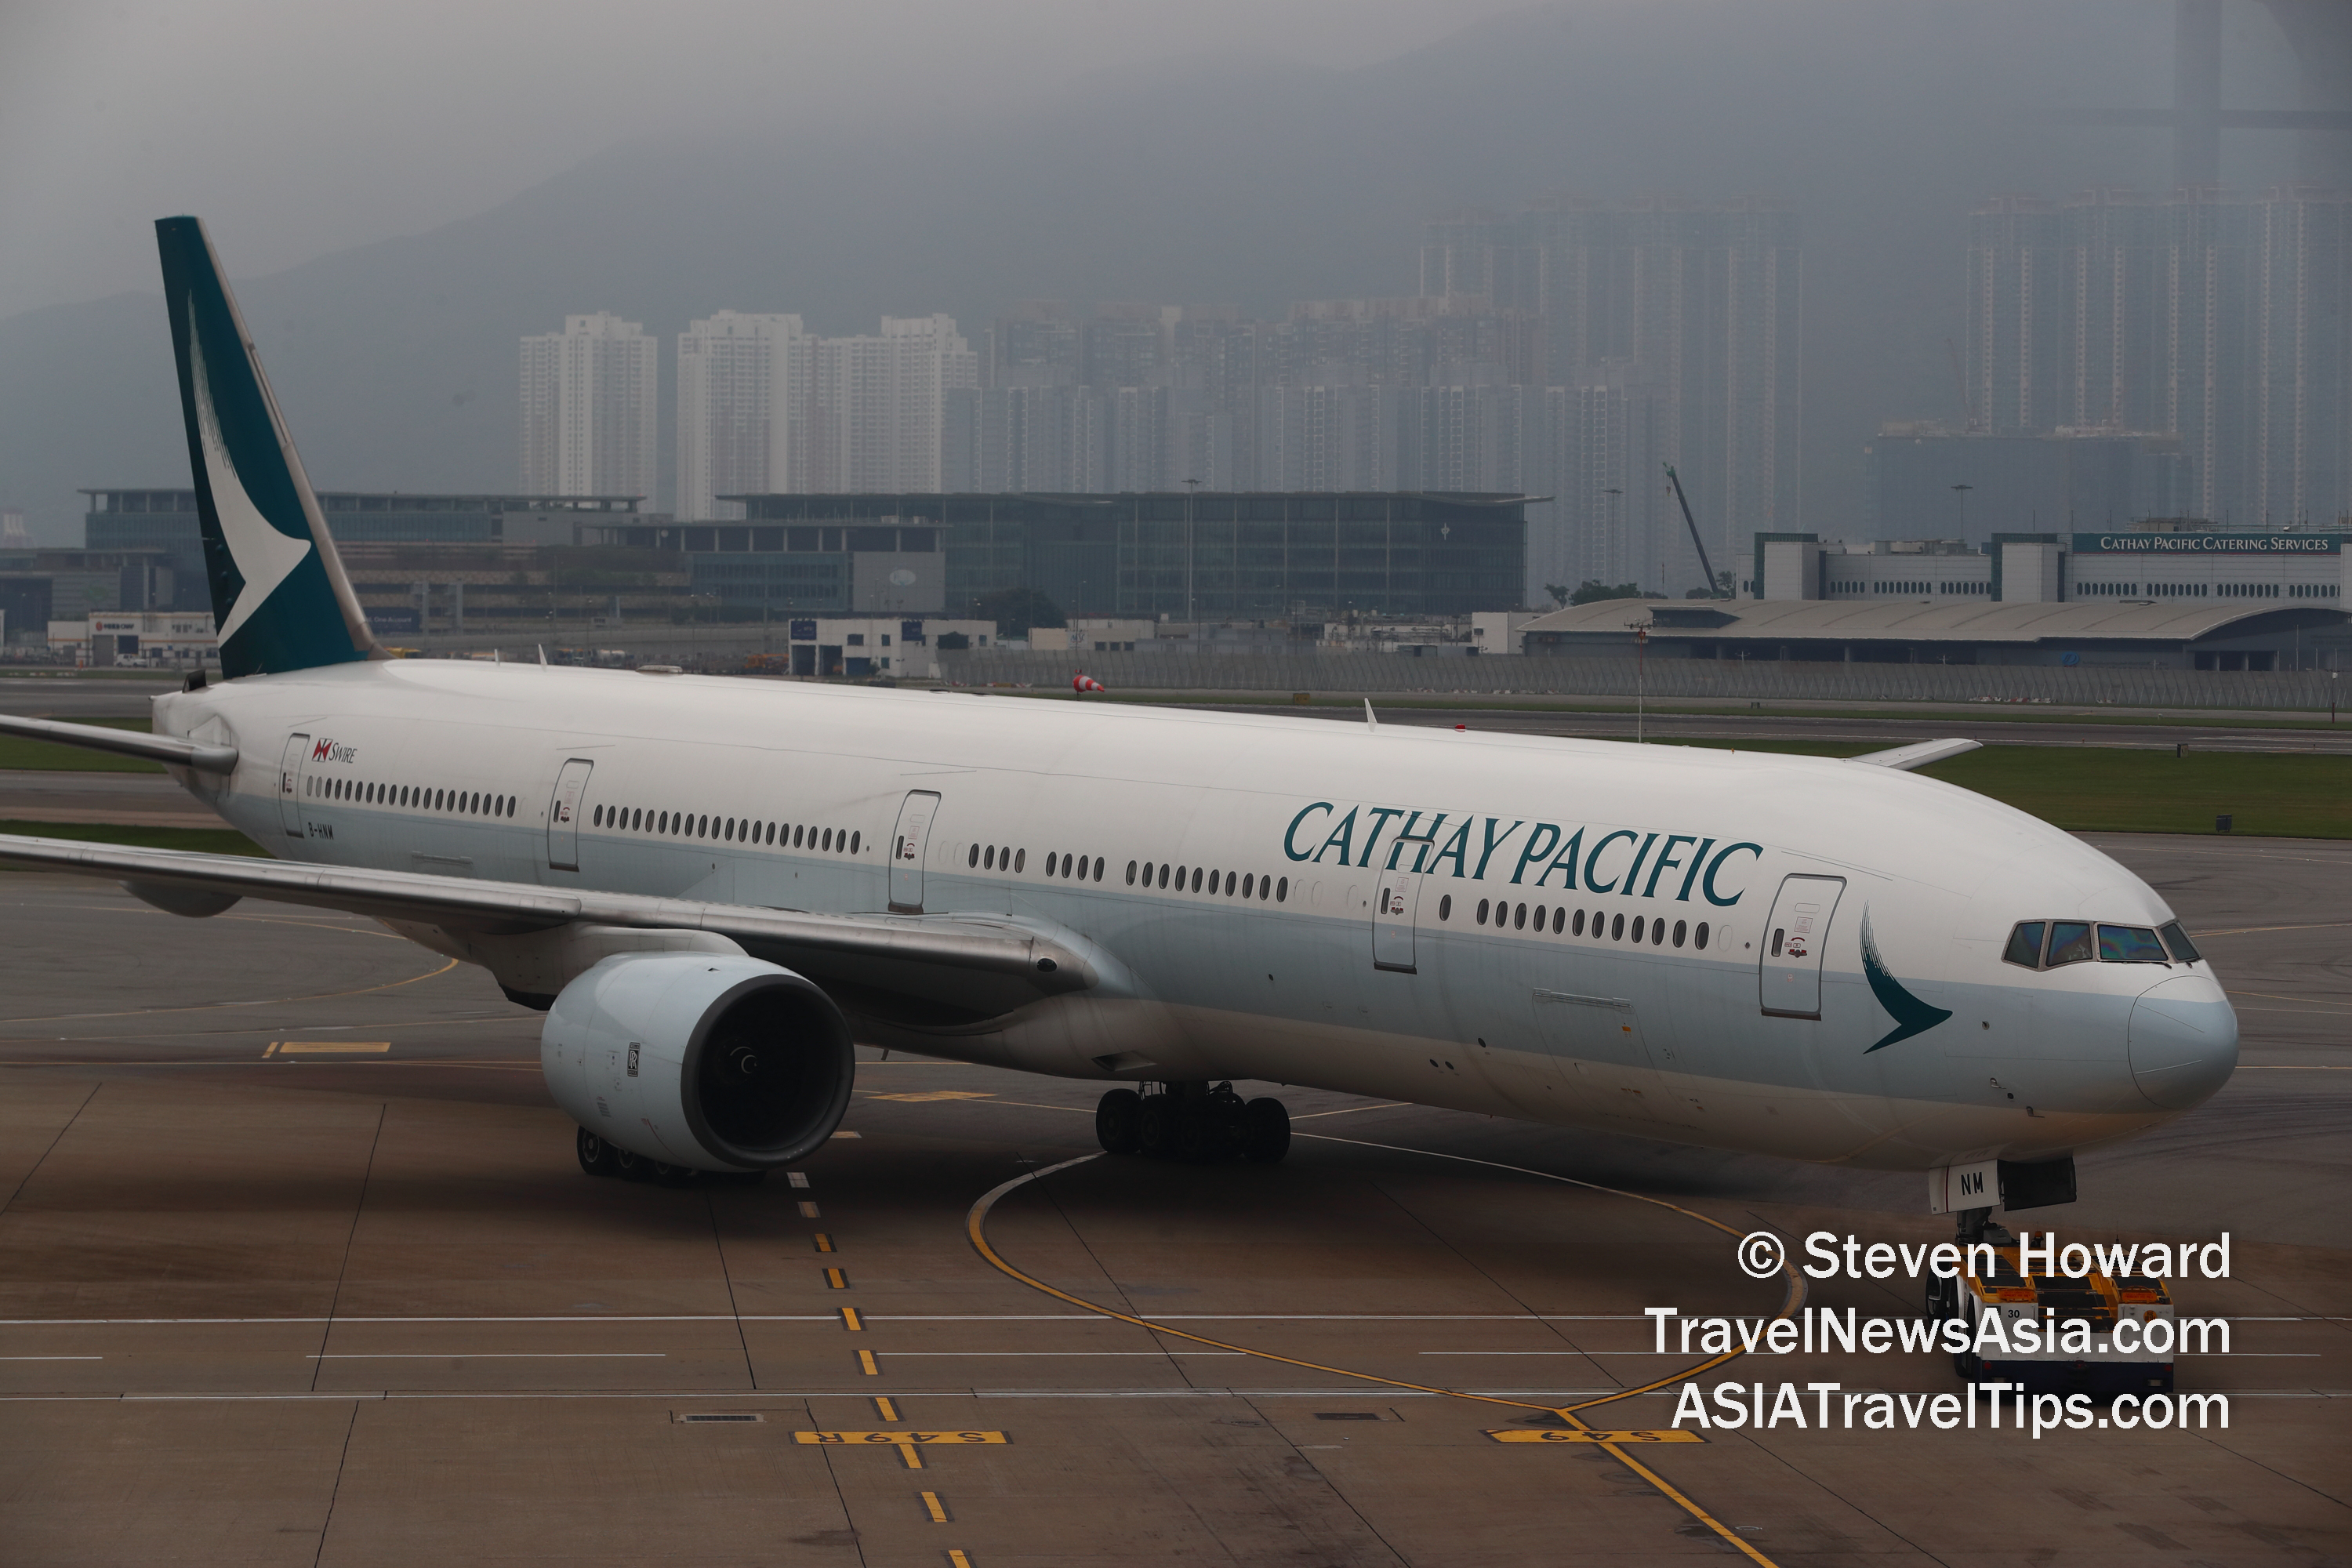 Cathay Pacific Boeing 777-300 reg: B-HNM. Picture by Steven Howard of TravelNewsAsia.com Click to enlarge.